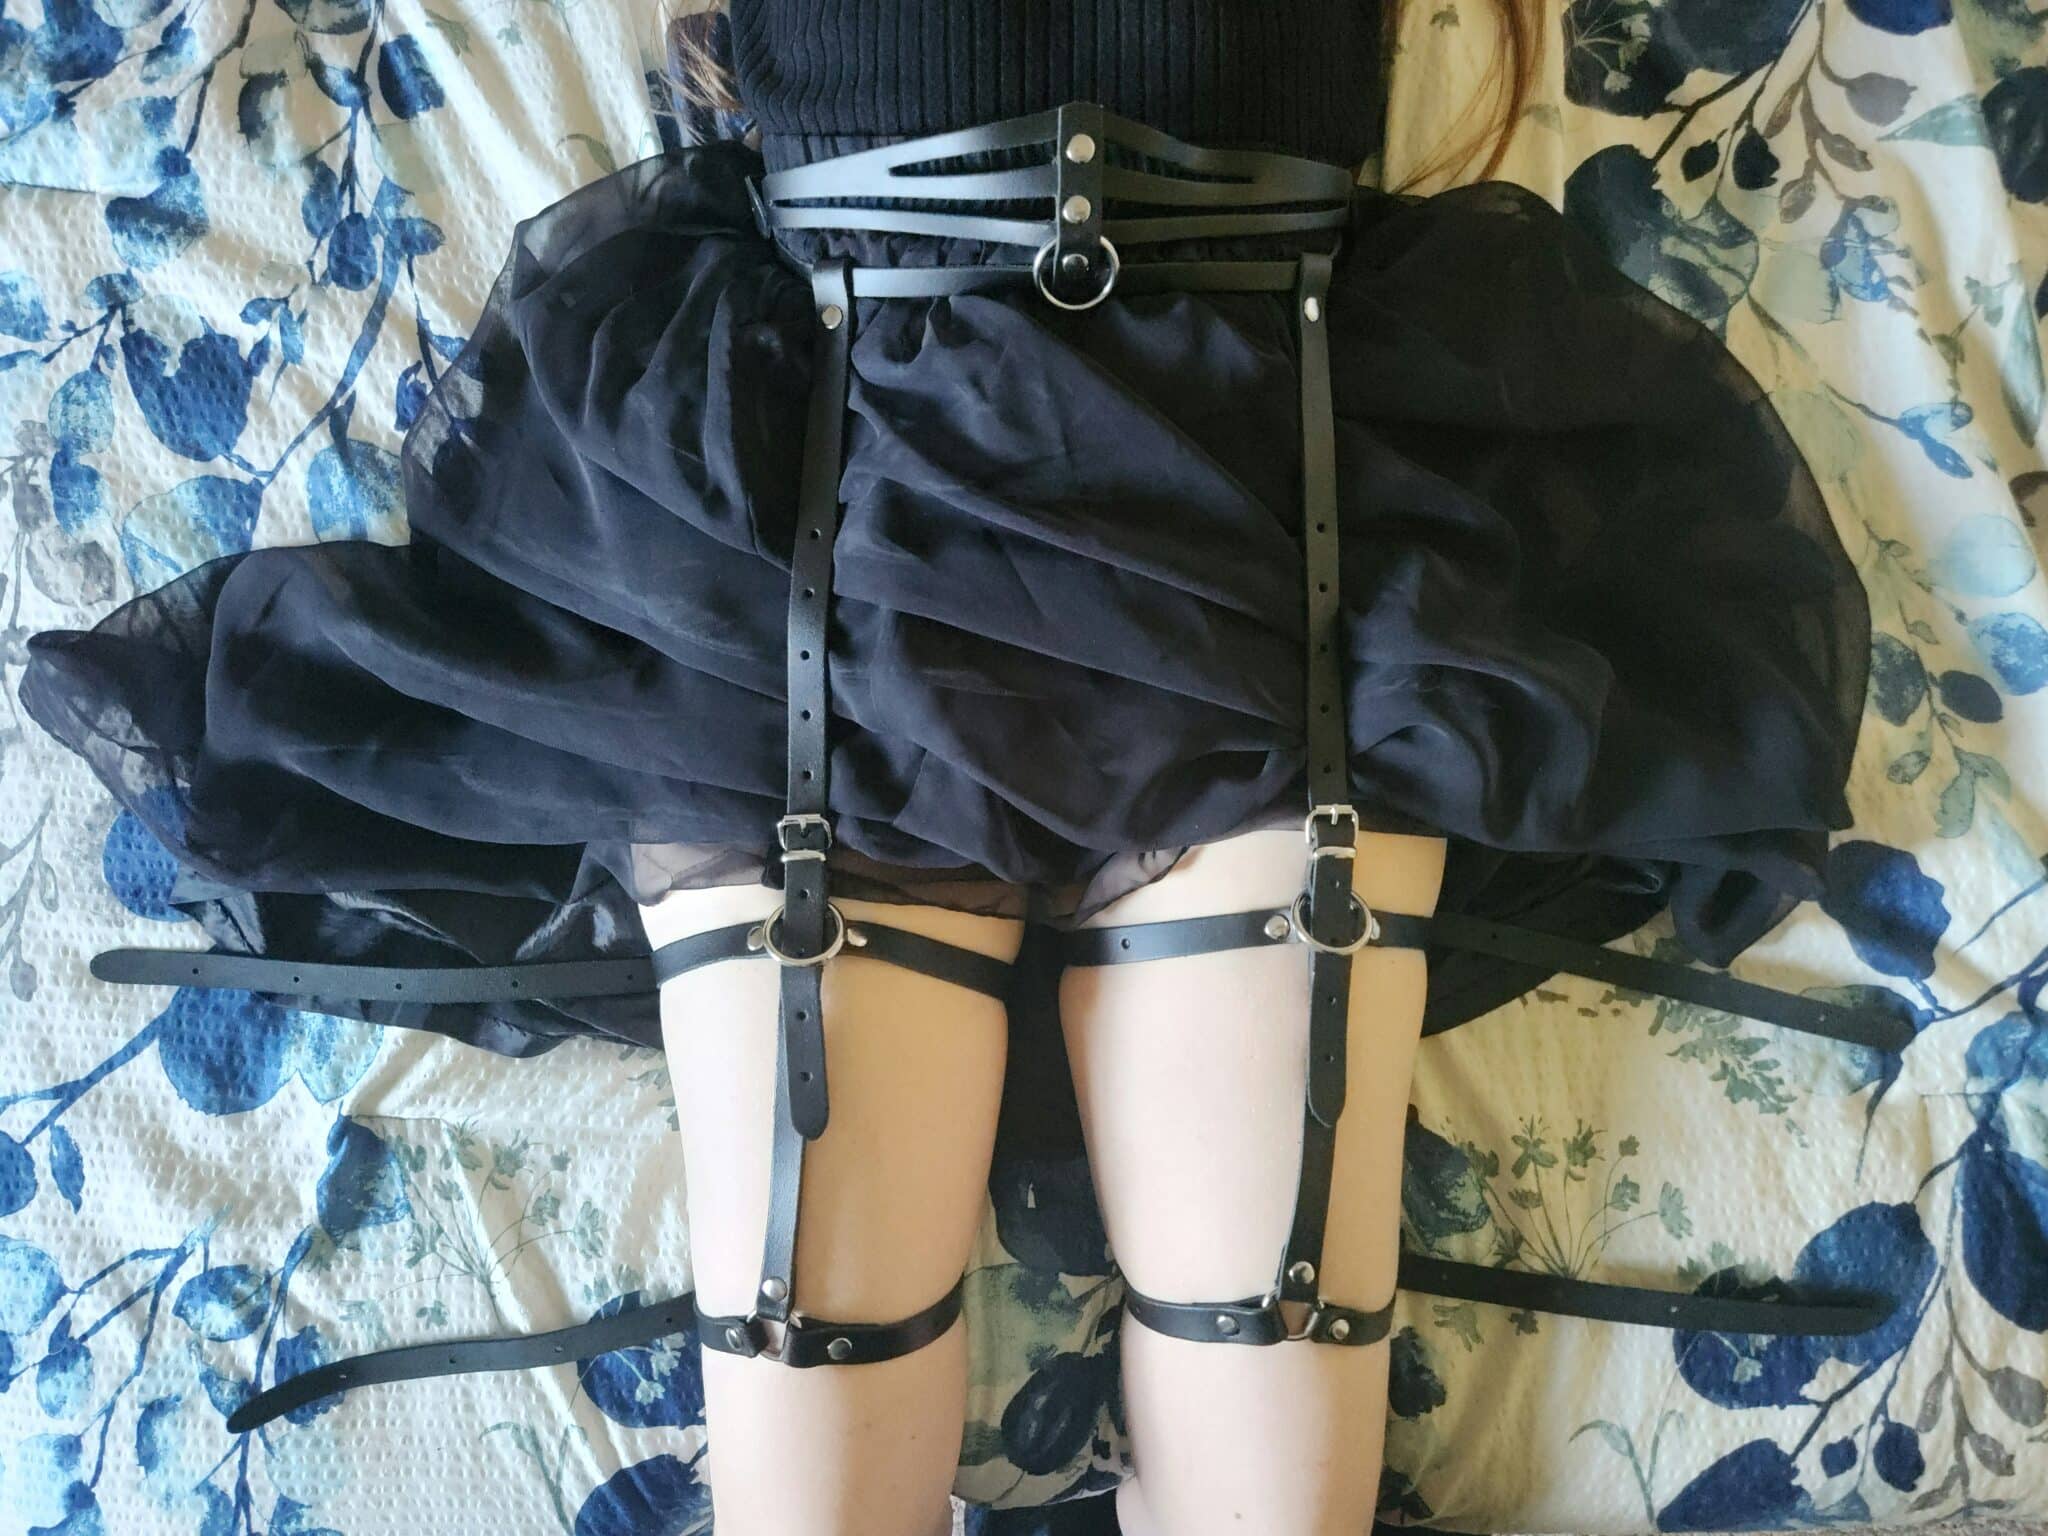 My Personal Experiences with DOMINIX Deluxe Leather Leg Harness